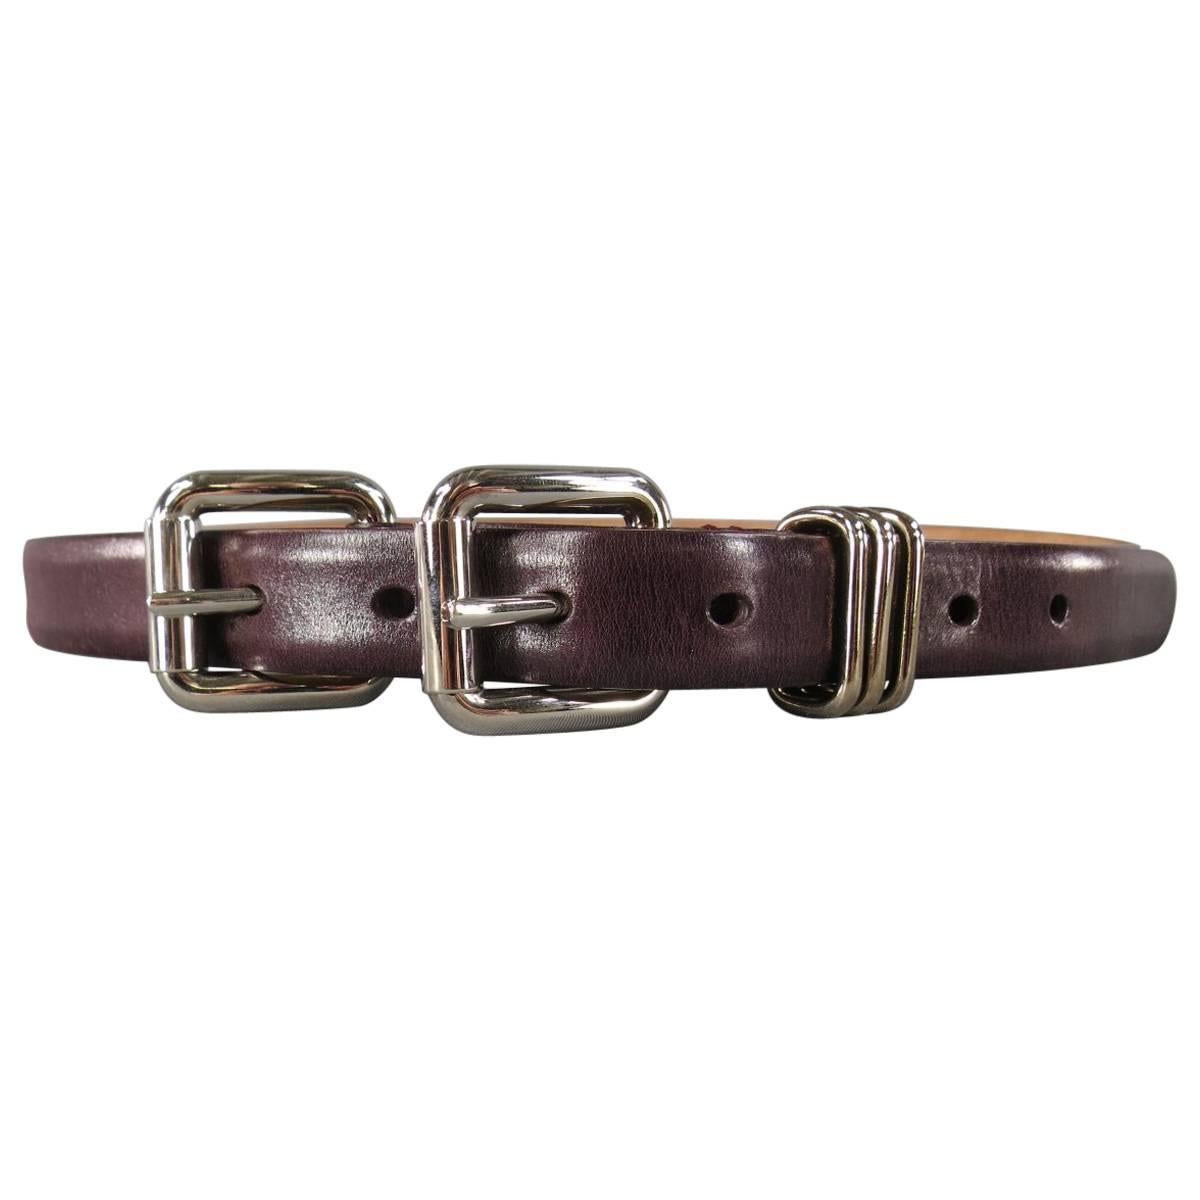 D&G by DOLCE & GABBANA Size 34 Brown Leather Double Buckle Skinny Belt